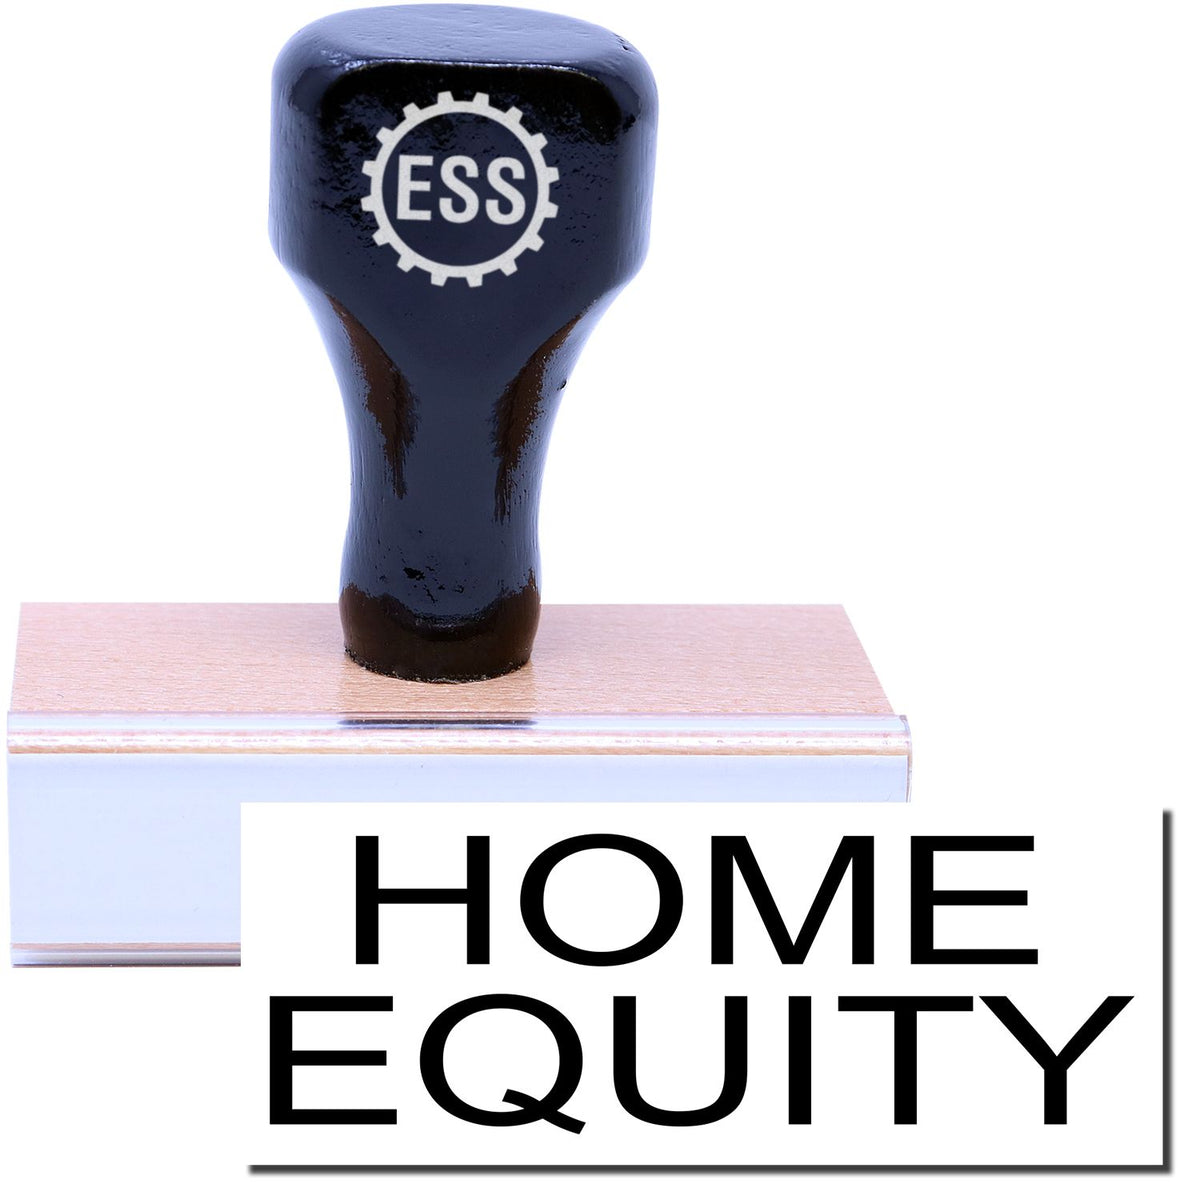 A stock office rubber stamp with a stamped image showing how the text &quot;HOME EQUITY&quot; in a large font is displayed after stamping.